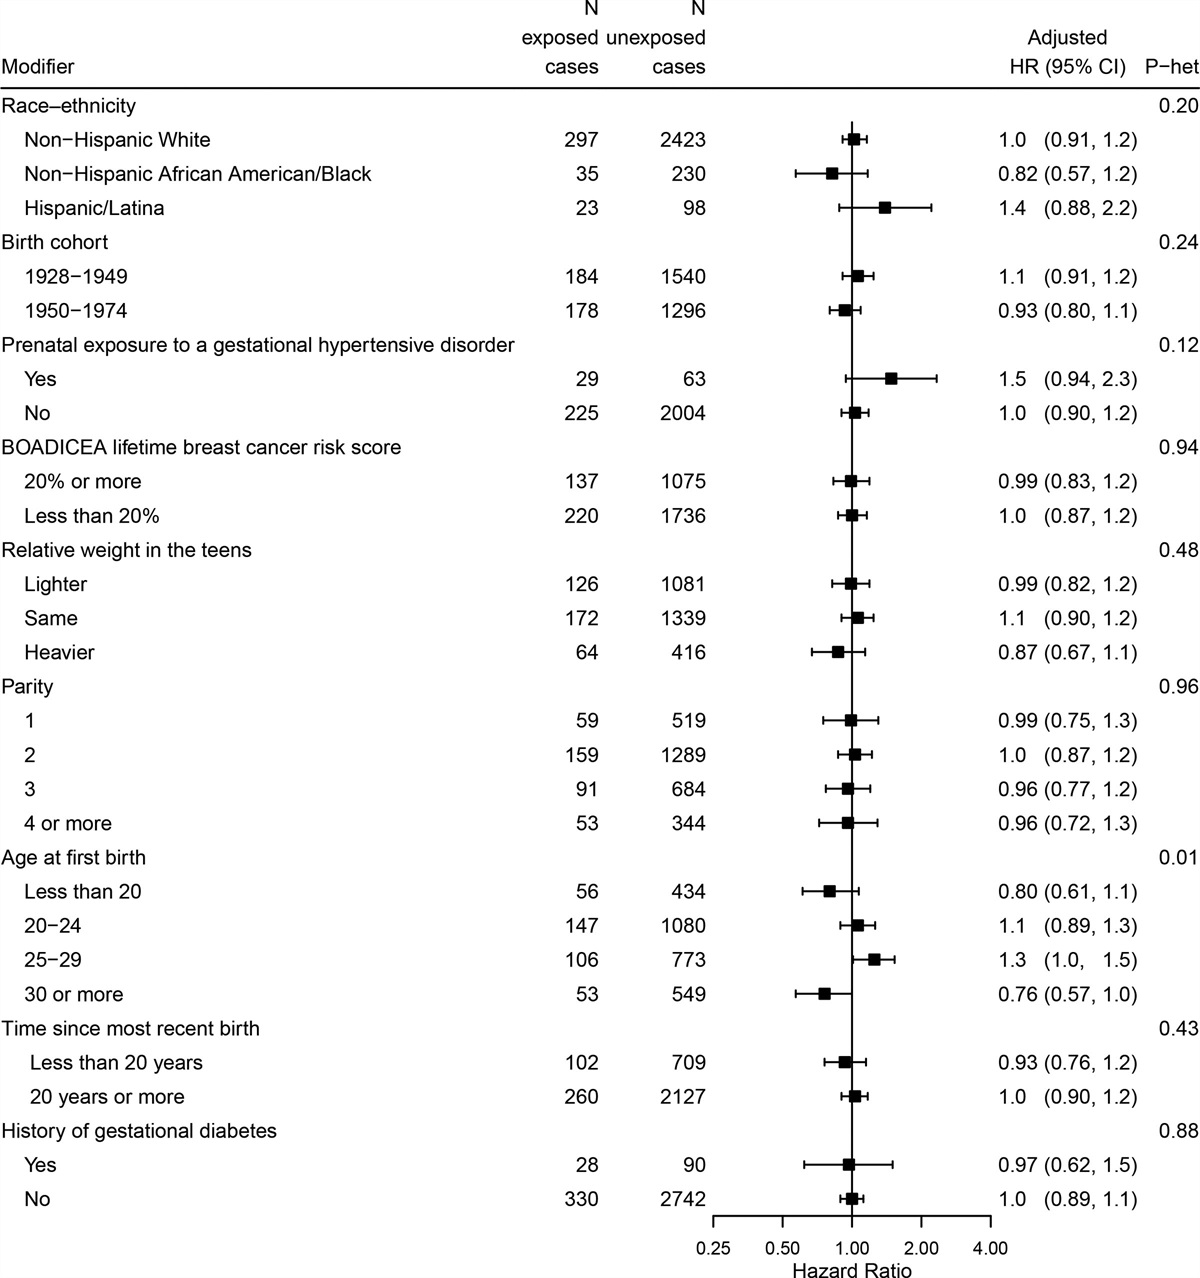 Gestational Hypertensive Disorders and Maternal Breast Cancer Risk in a Nationwide Cohort of 40,720 Parous Women